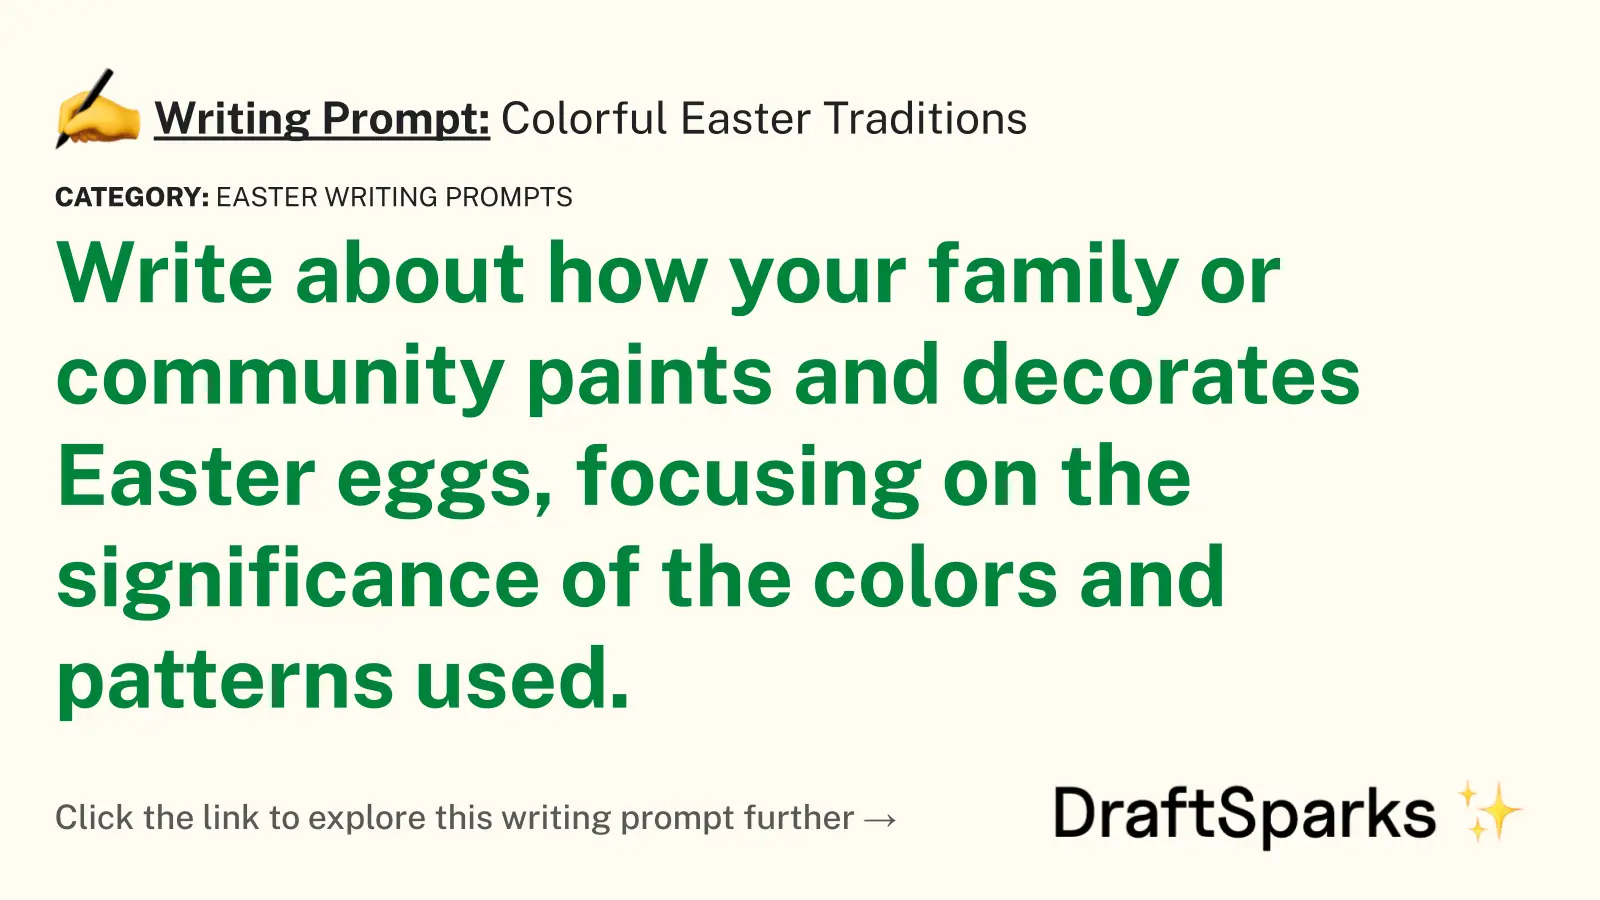 Colorful Easter Traditions